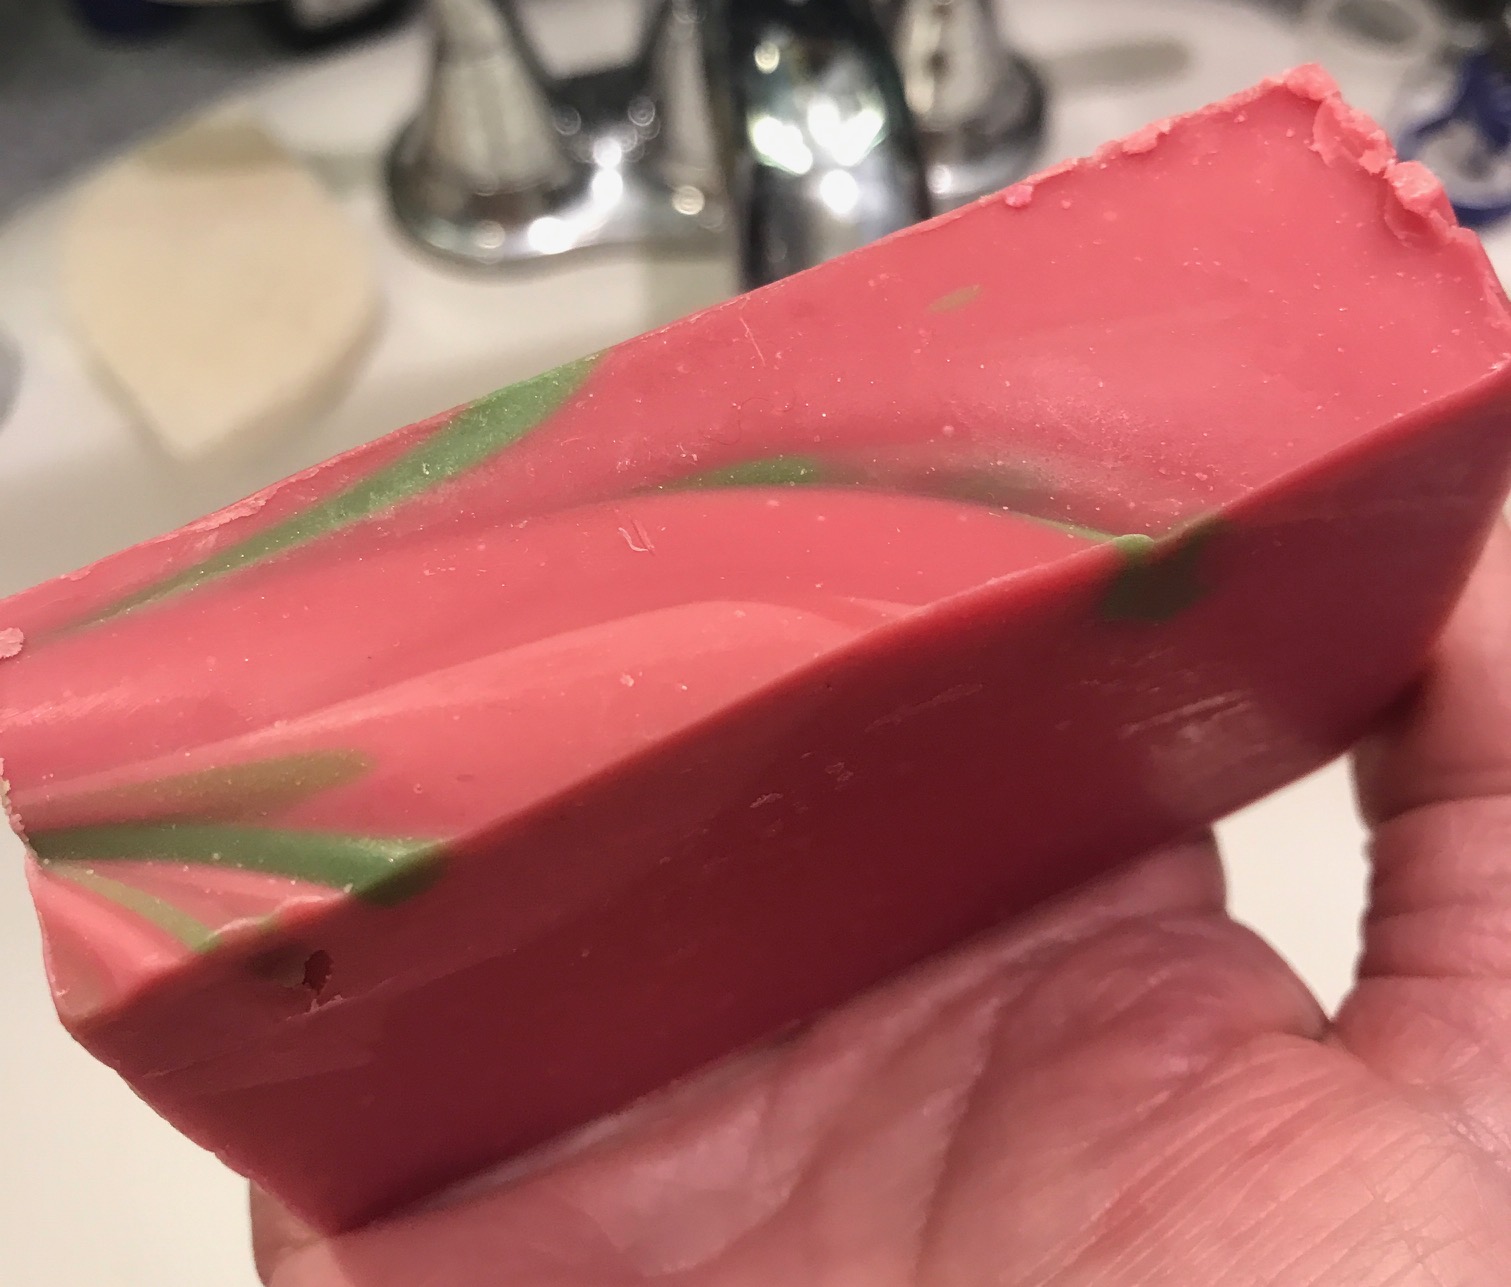 pink handcrafted bar soap with green accents from Village Naturals Aromatherapy Hydrate & Exfoliate Soap, neversaydiebeauty.com